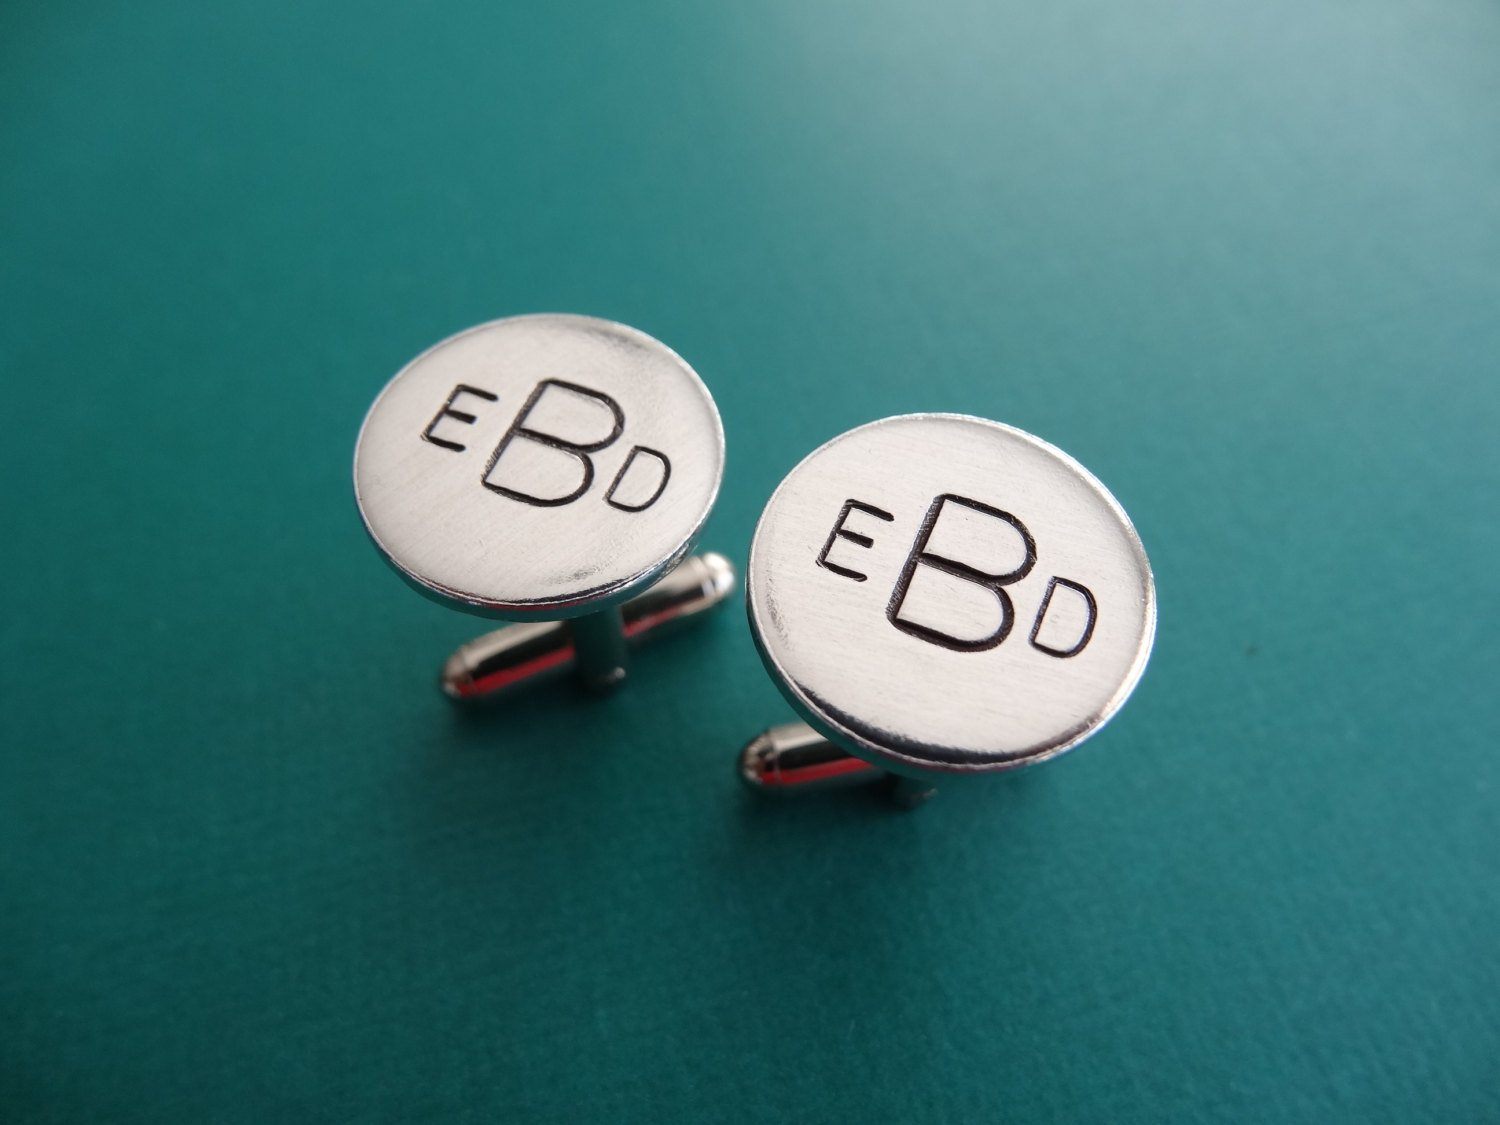 Button Cover Monogram Personalised Engraved Cufflinks